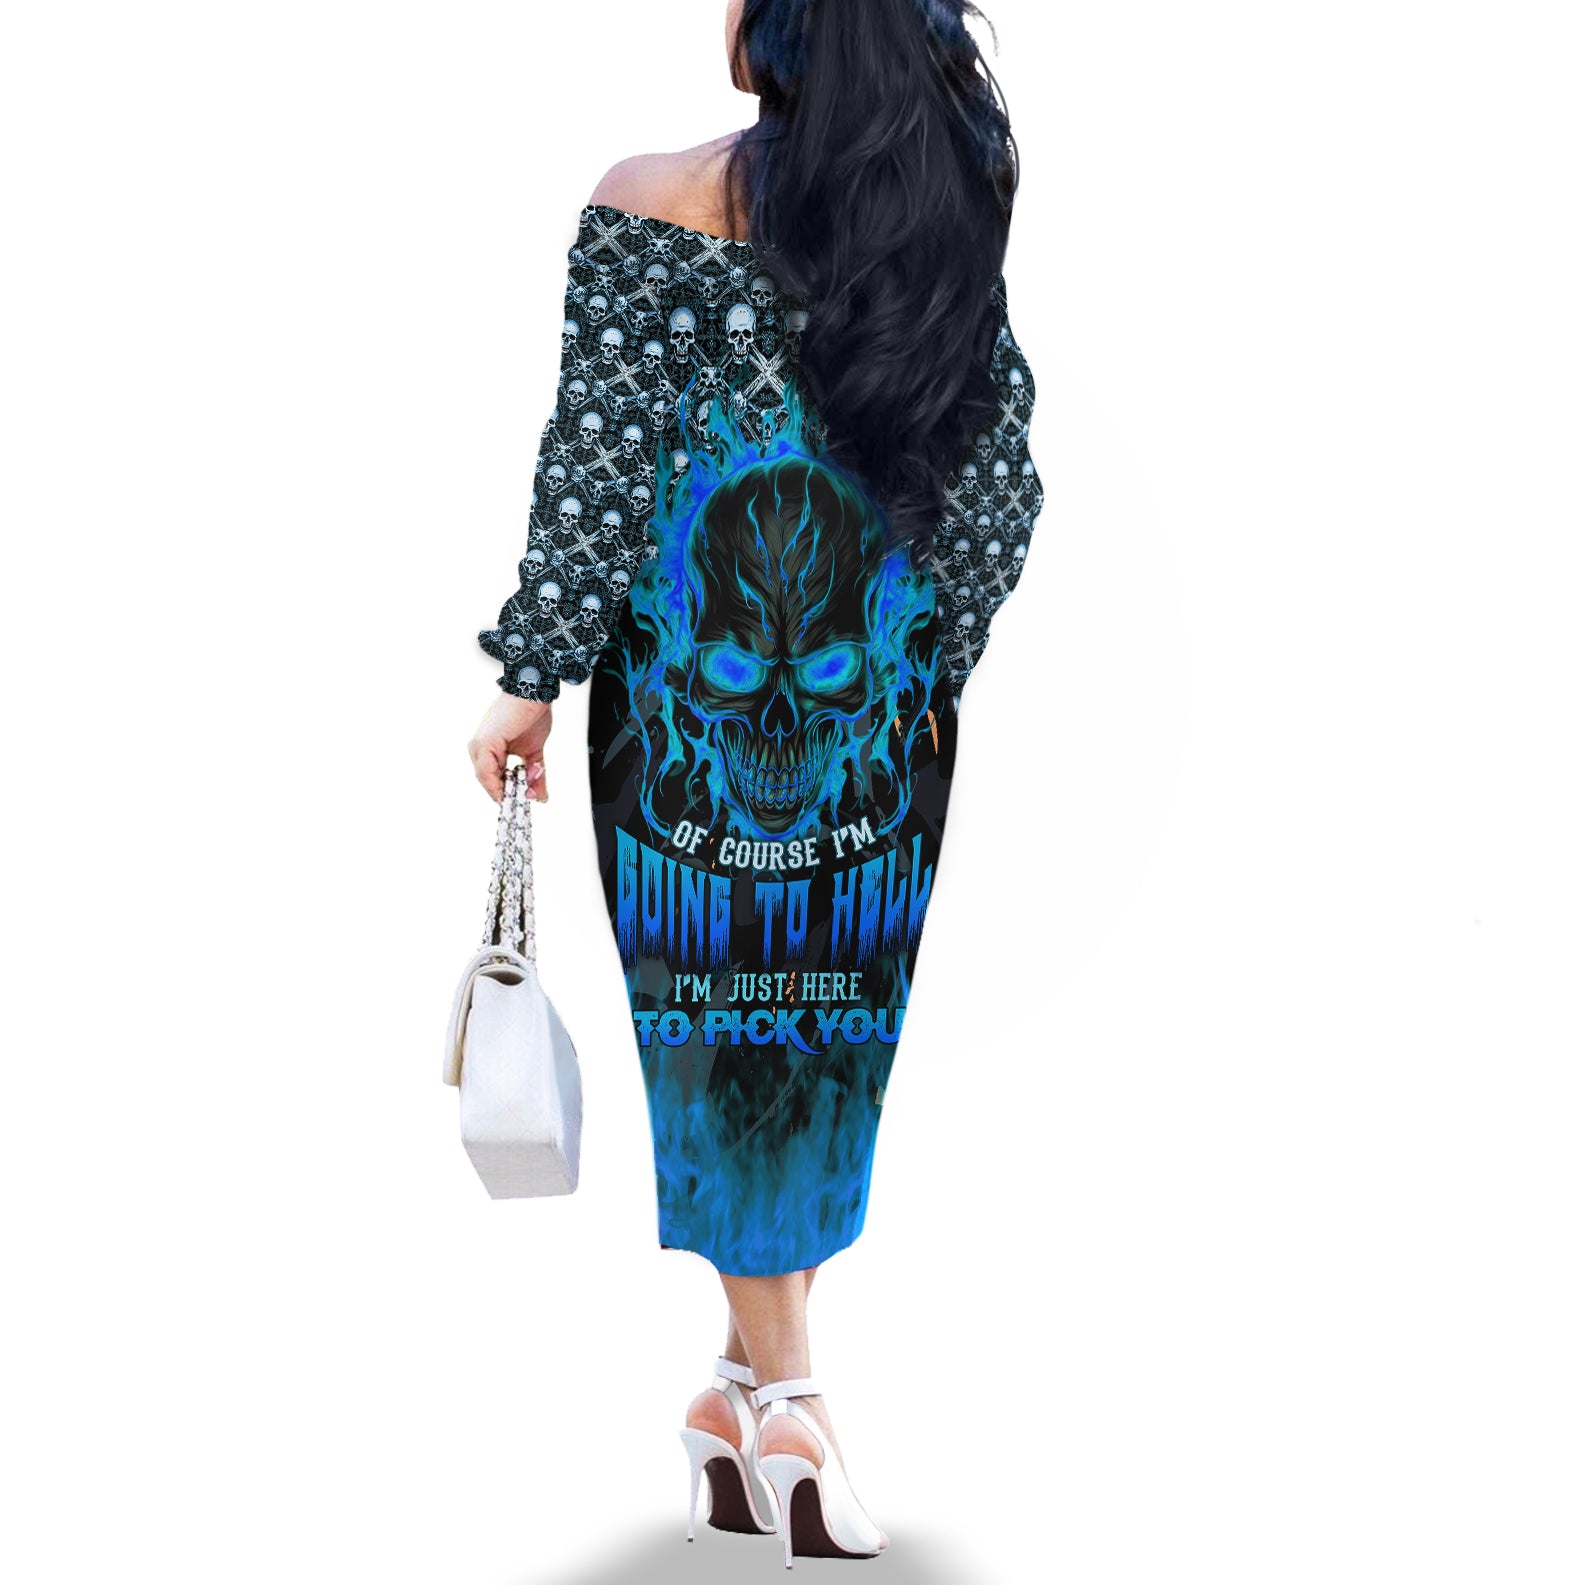 fire-skull-off-the-shoulder-long-sleeve-dress-of-course-im-going-to-hell-im-just-here-to-pick-you-up